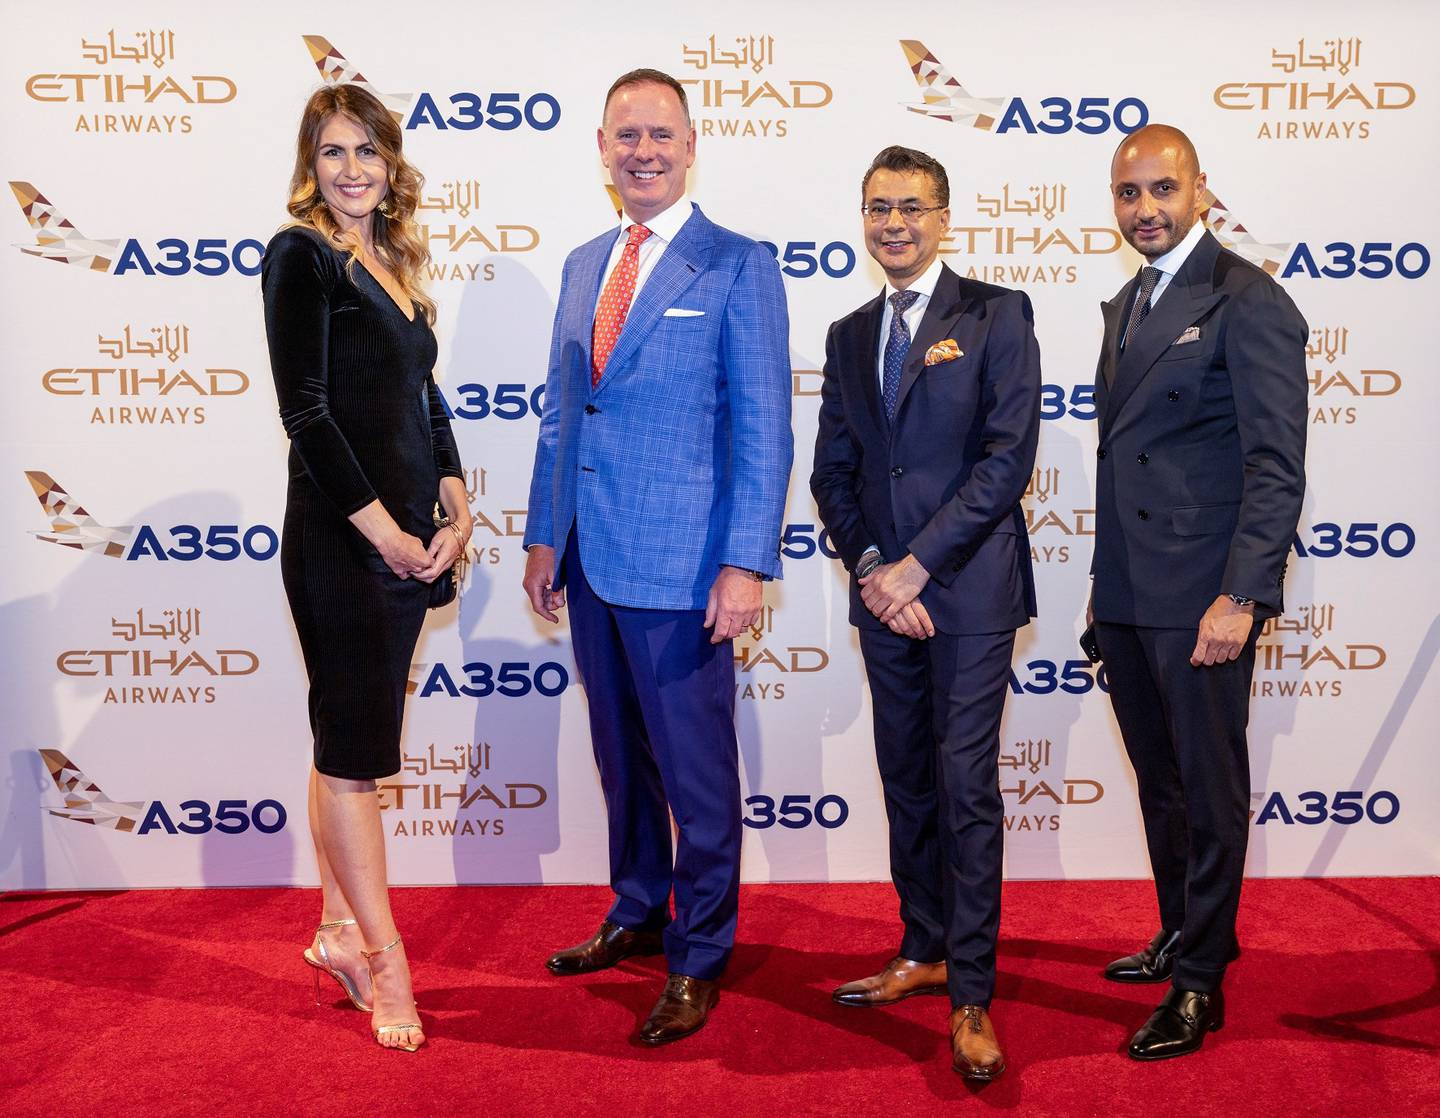 Etihad Airways VP Loyalty and Partnerships Kim Hardaker and Group Chief Executive Tony Douglas pose with Marriott International Group Chief Operating Officer Sandeep Walia and General Manager Moustafa Sakr at the event in New York.Photo: Etihad